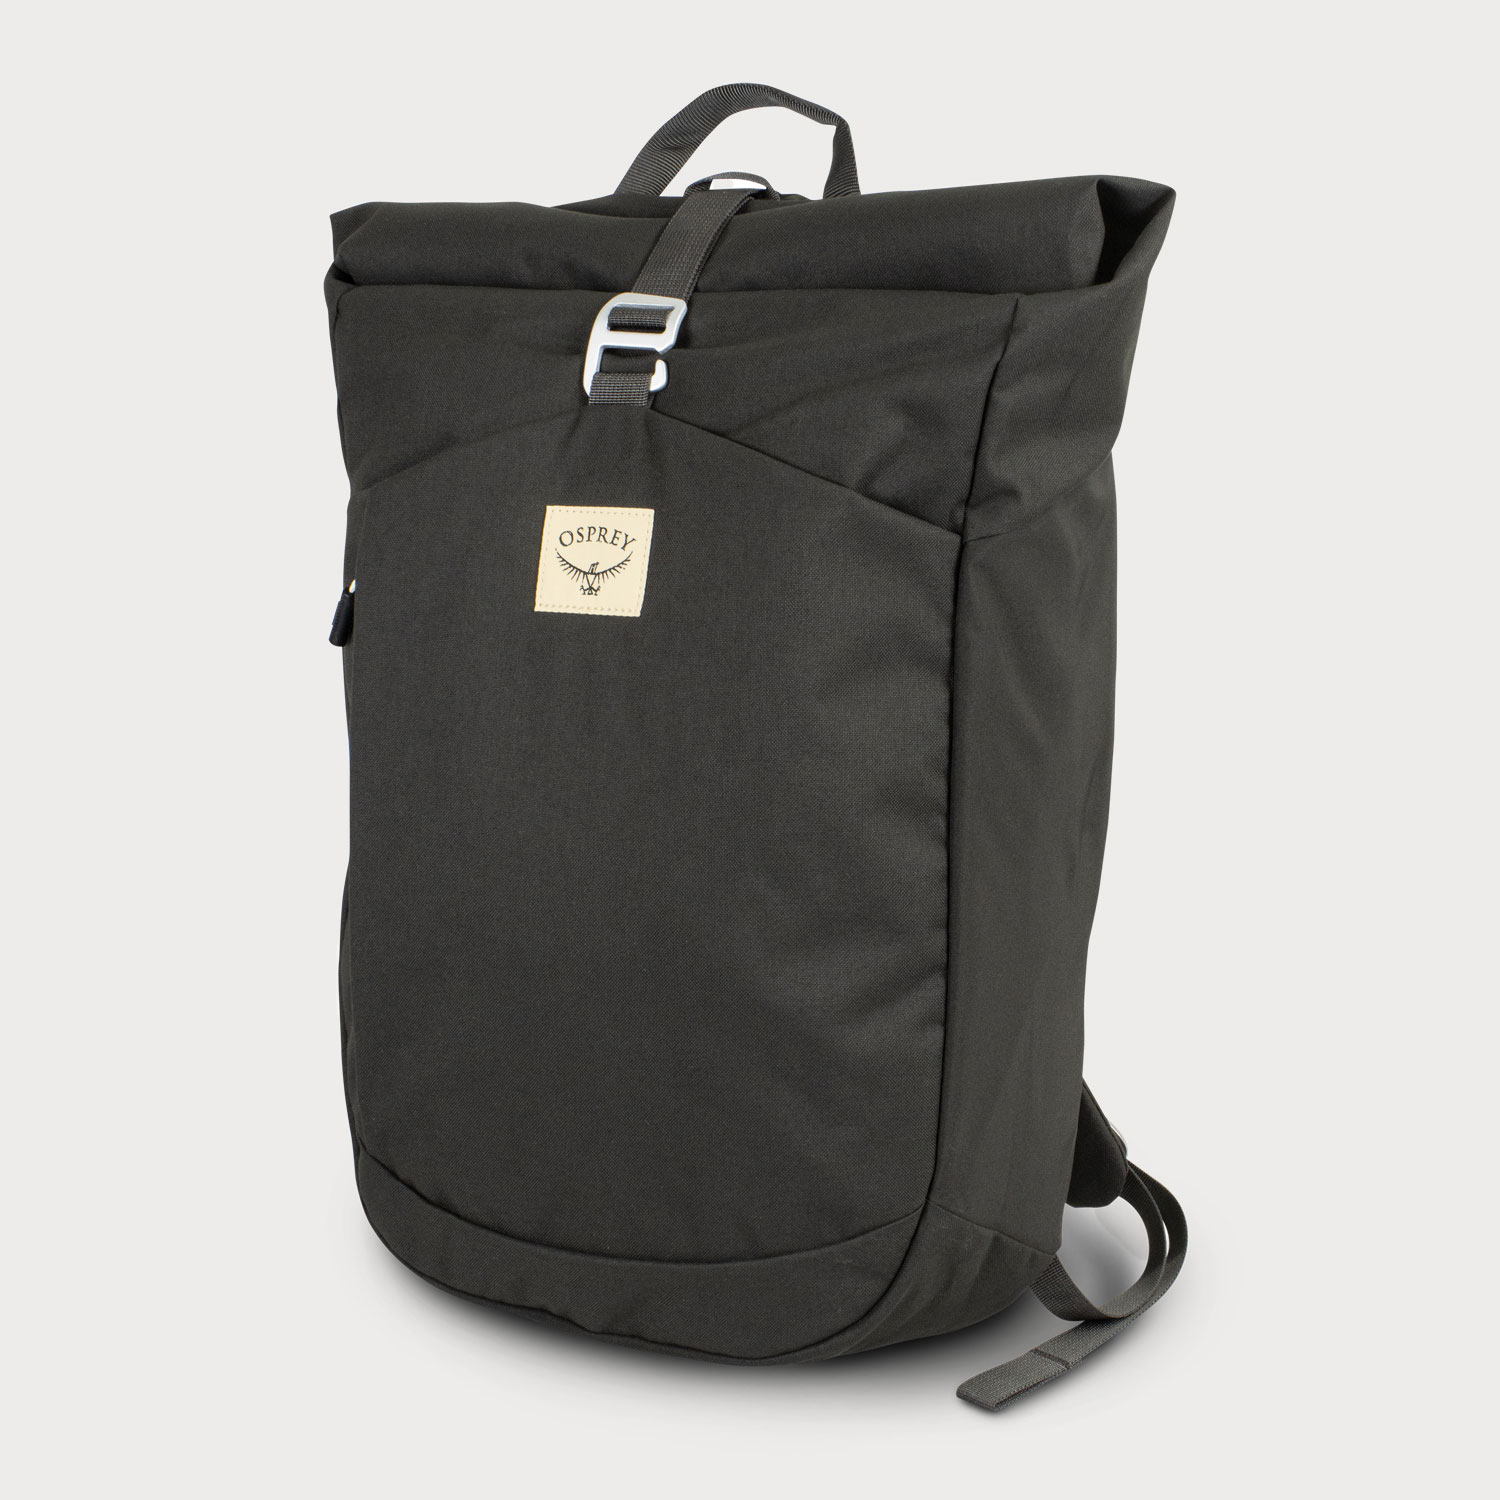 Osprey Arcane Roll Top Backpack | PrimoProducts